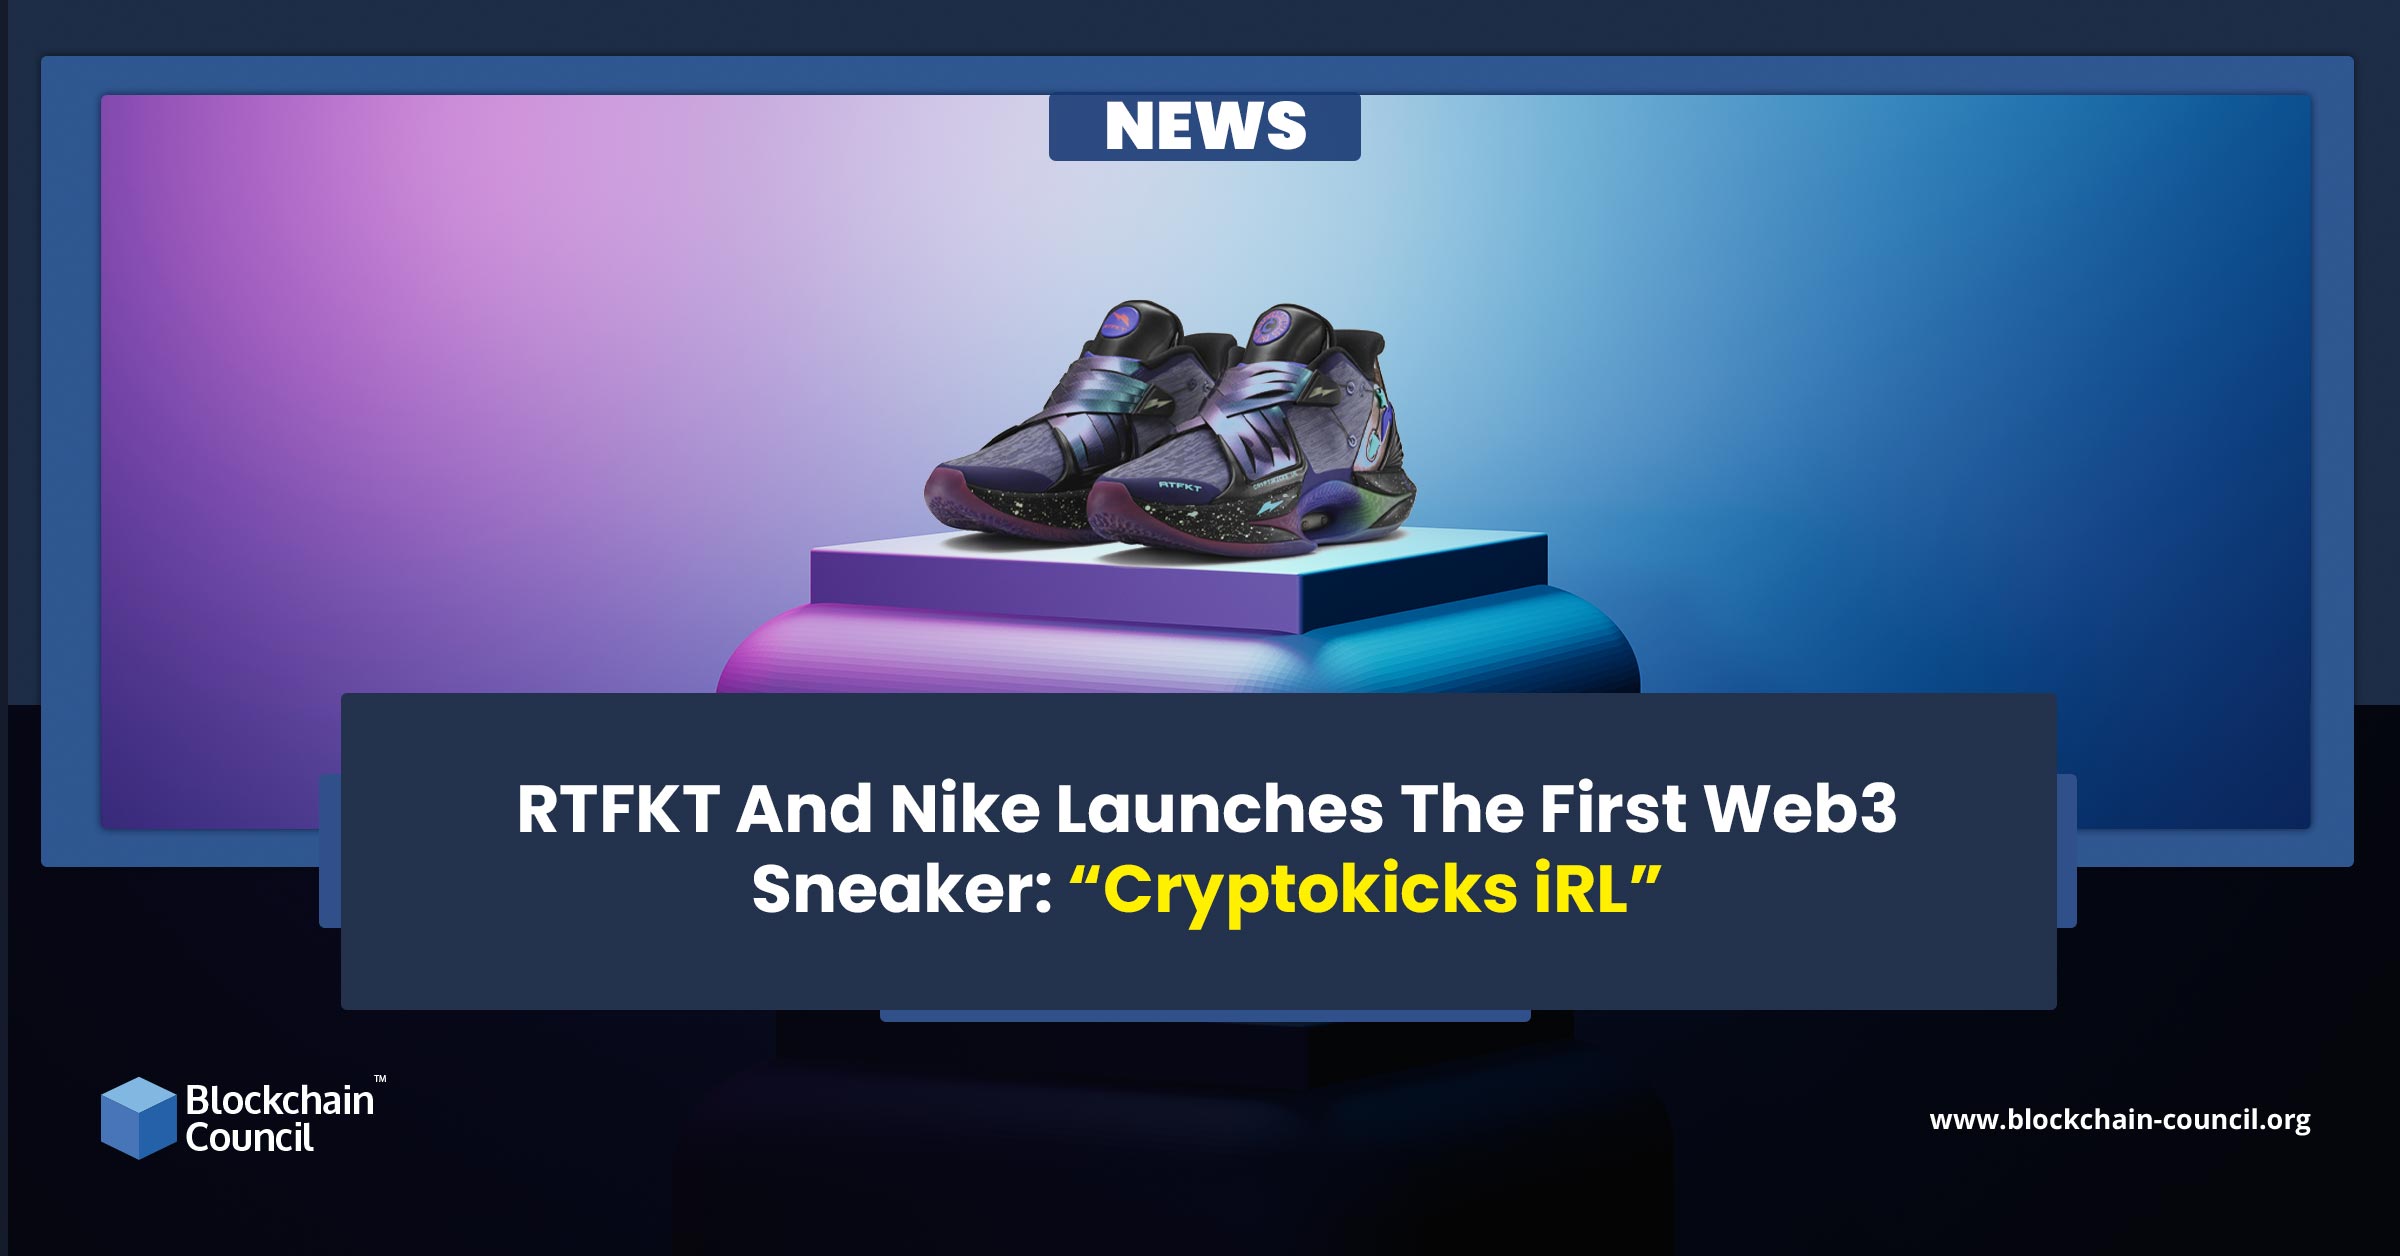 RTFKT And Nike Launches The First Web3 Sneaker “Cryptokicks iRL”